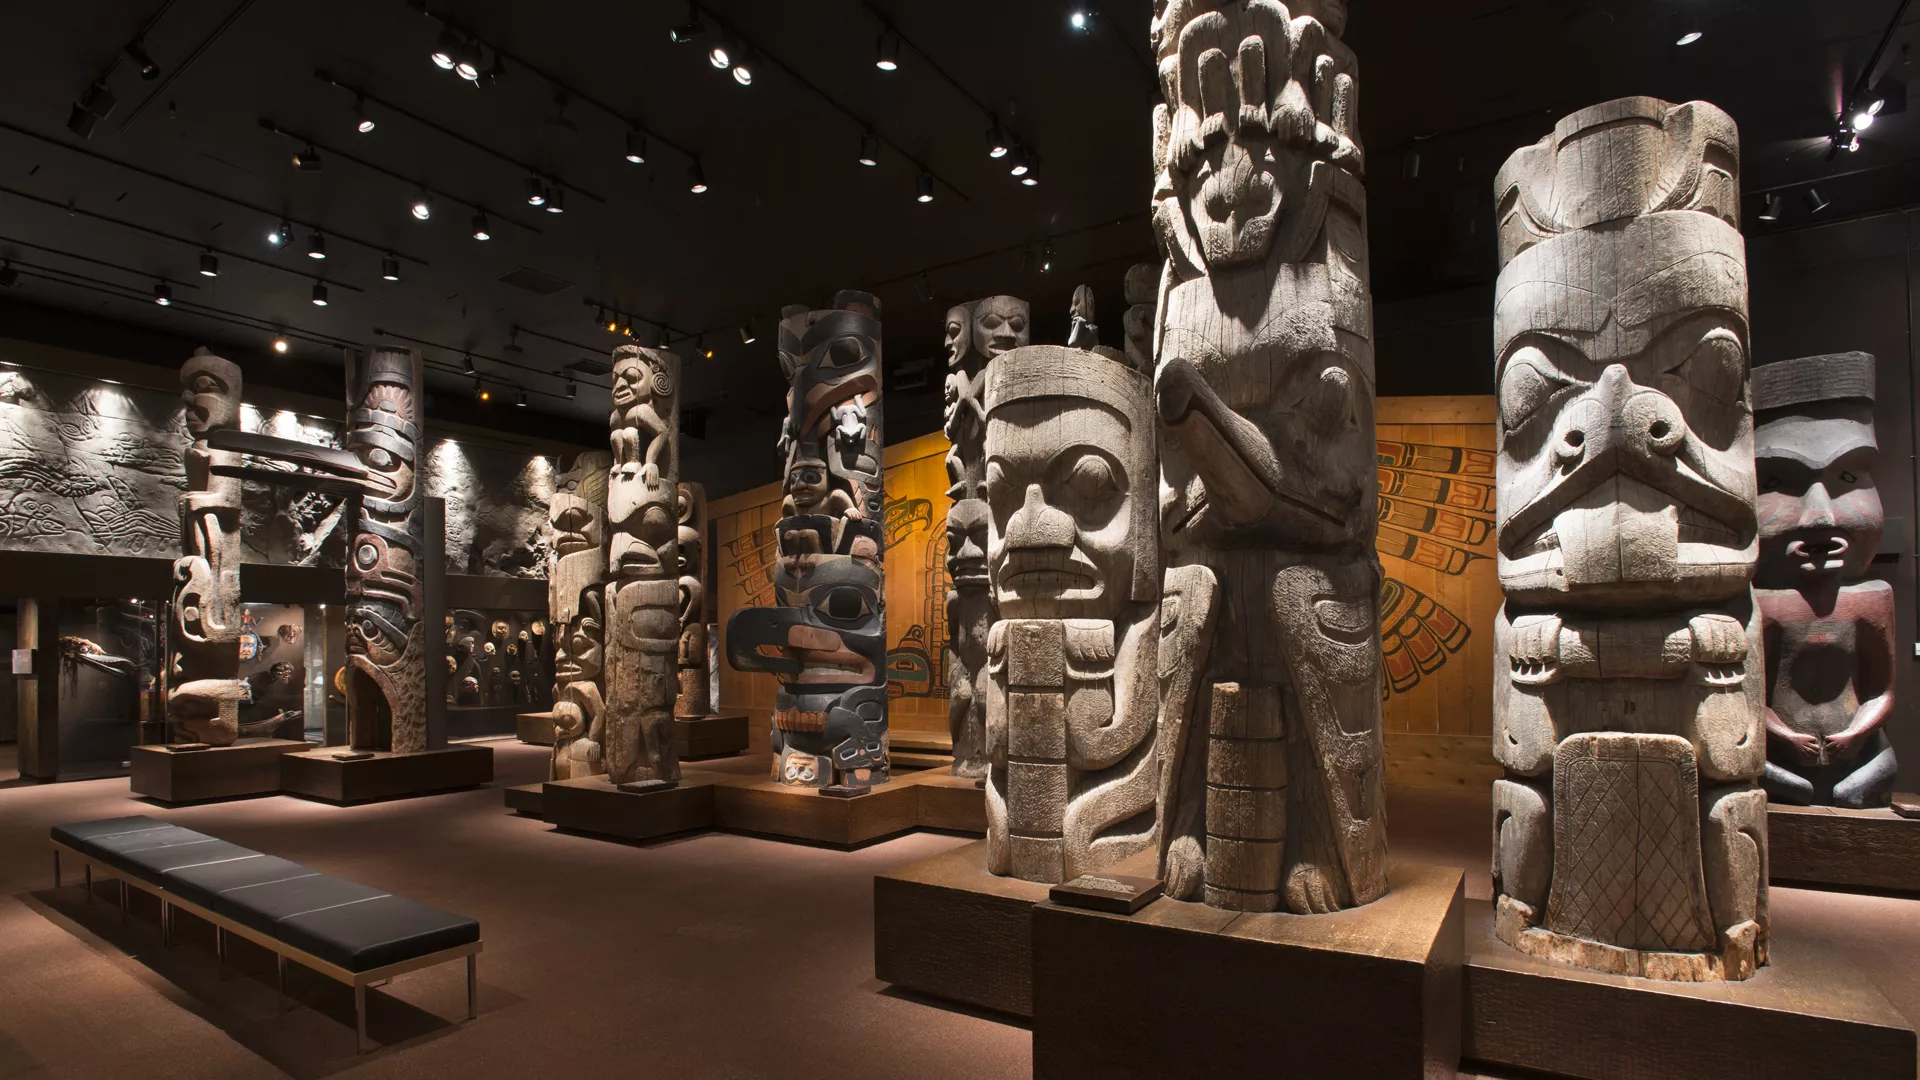 Royal BC Museum in Canada, North America | Museums - Rated 4